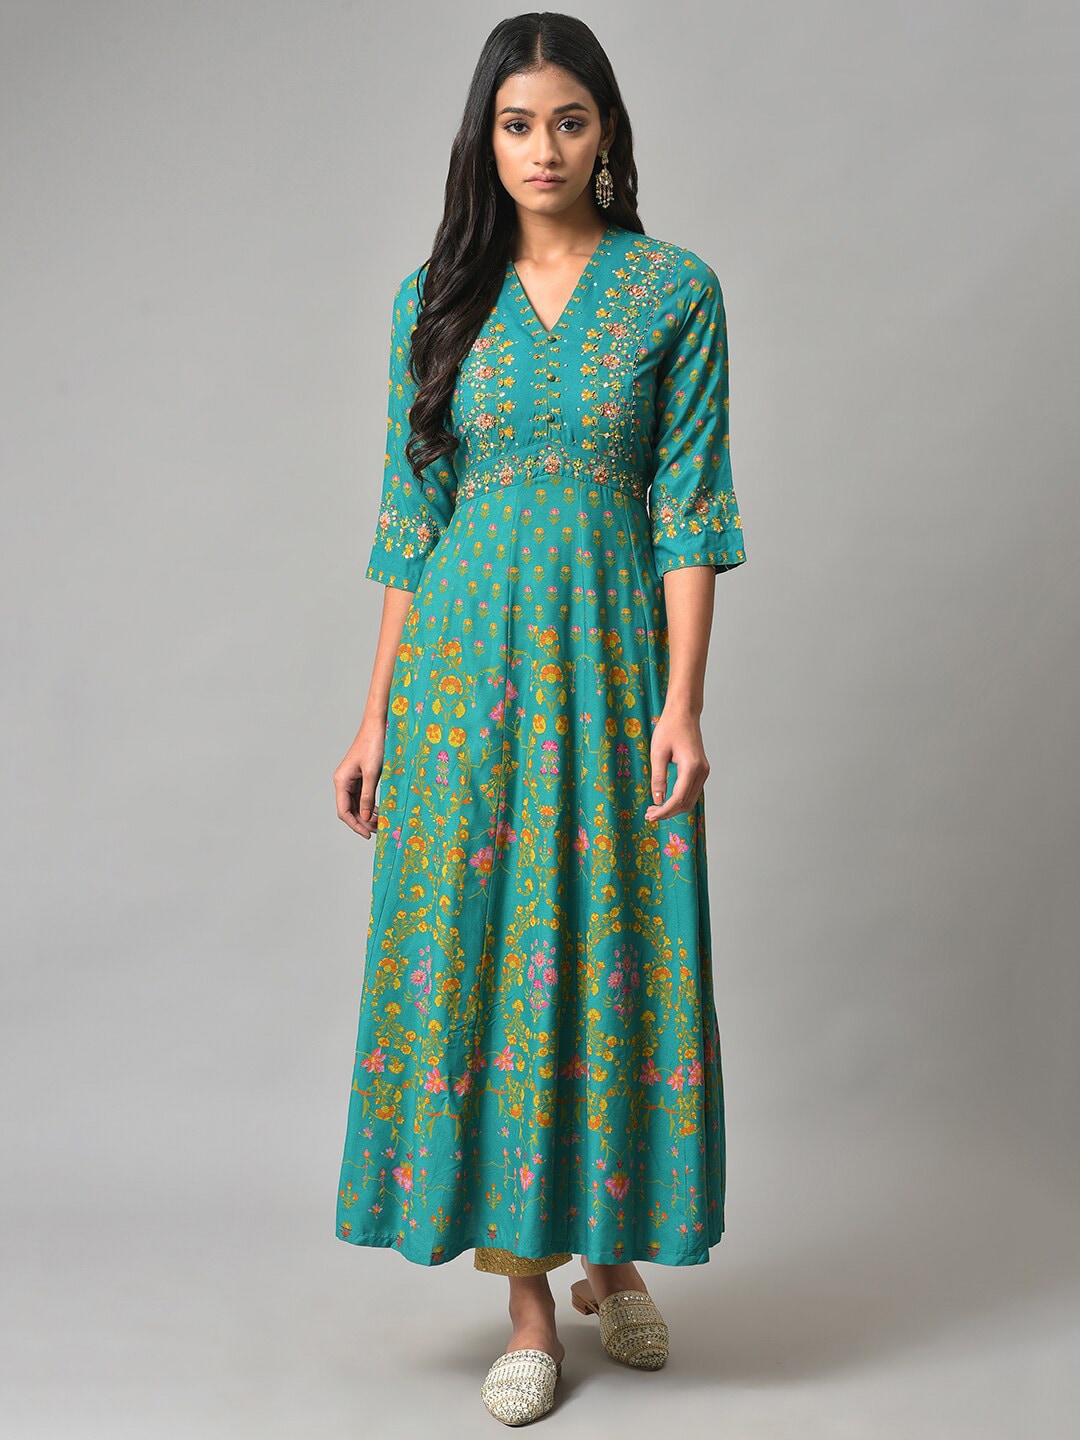 W Green Floral Printed Ethnic Maxi Dress Price in India